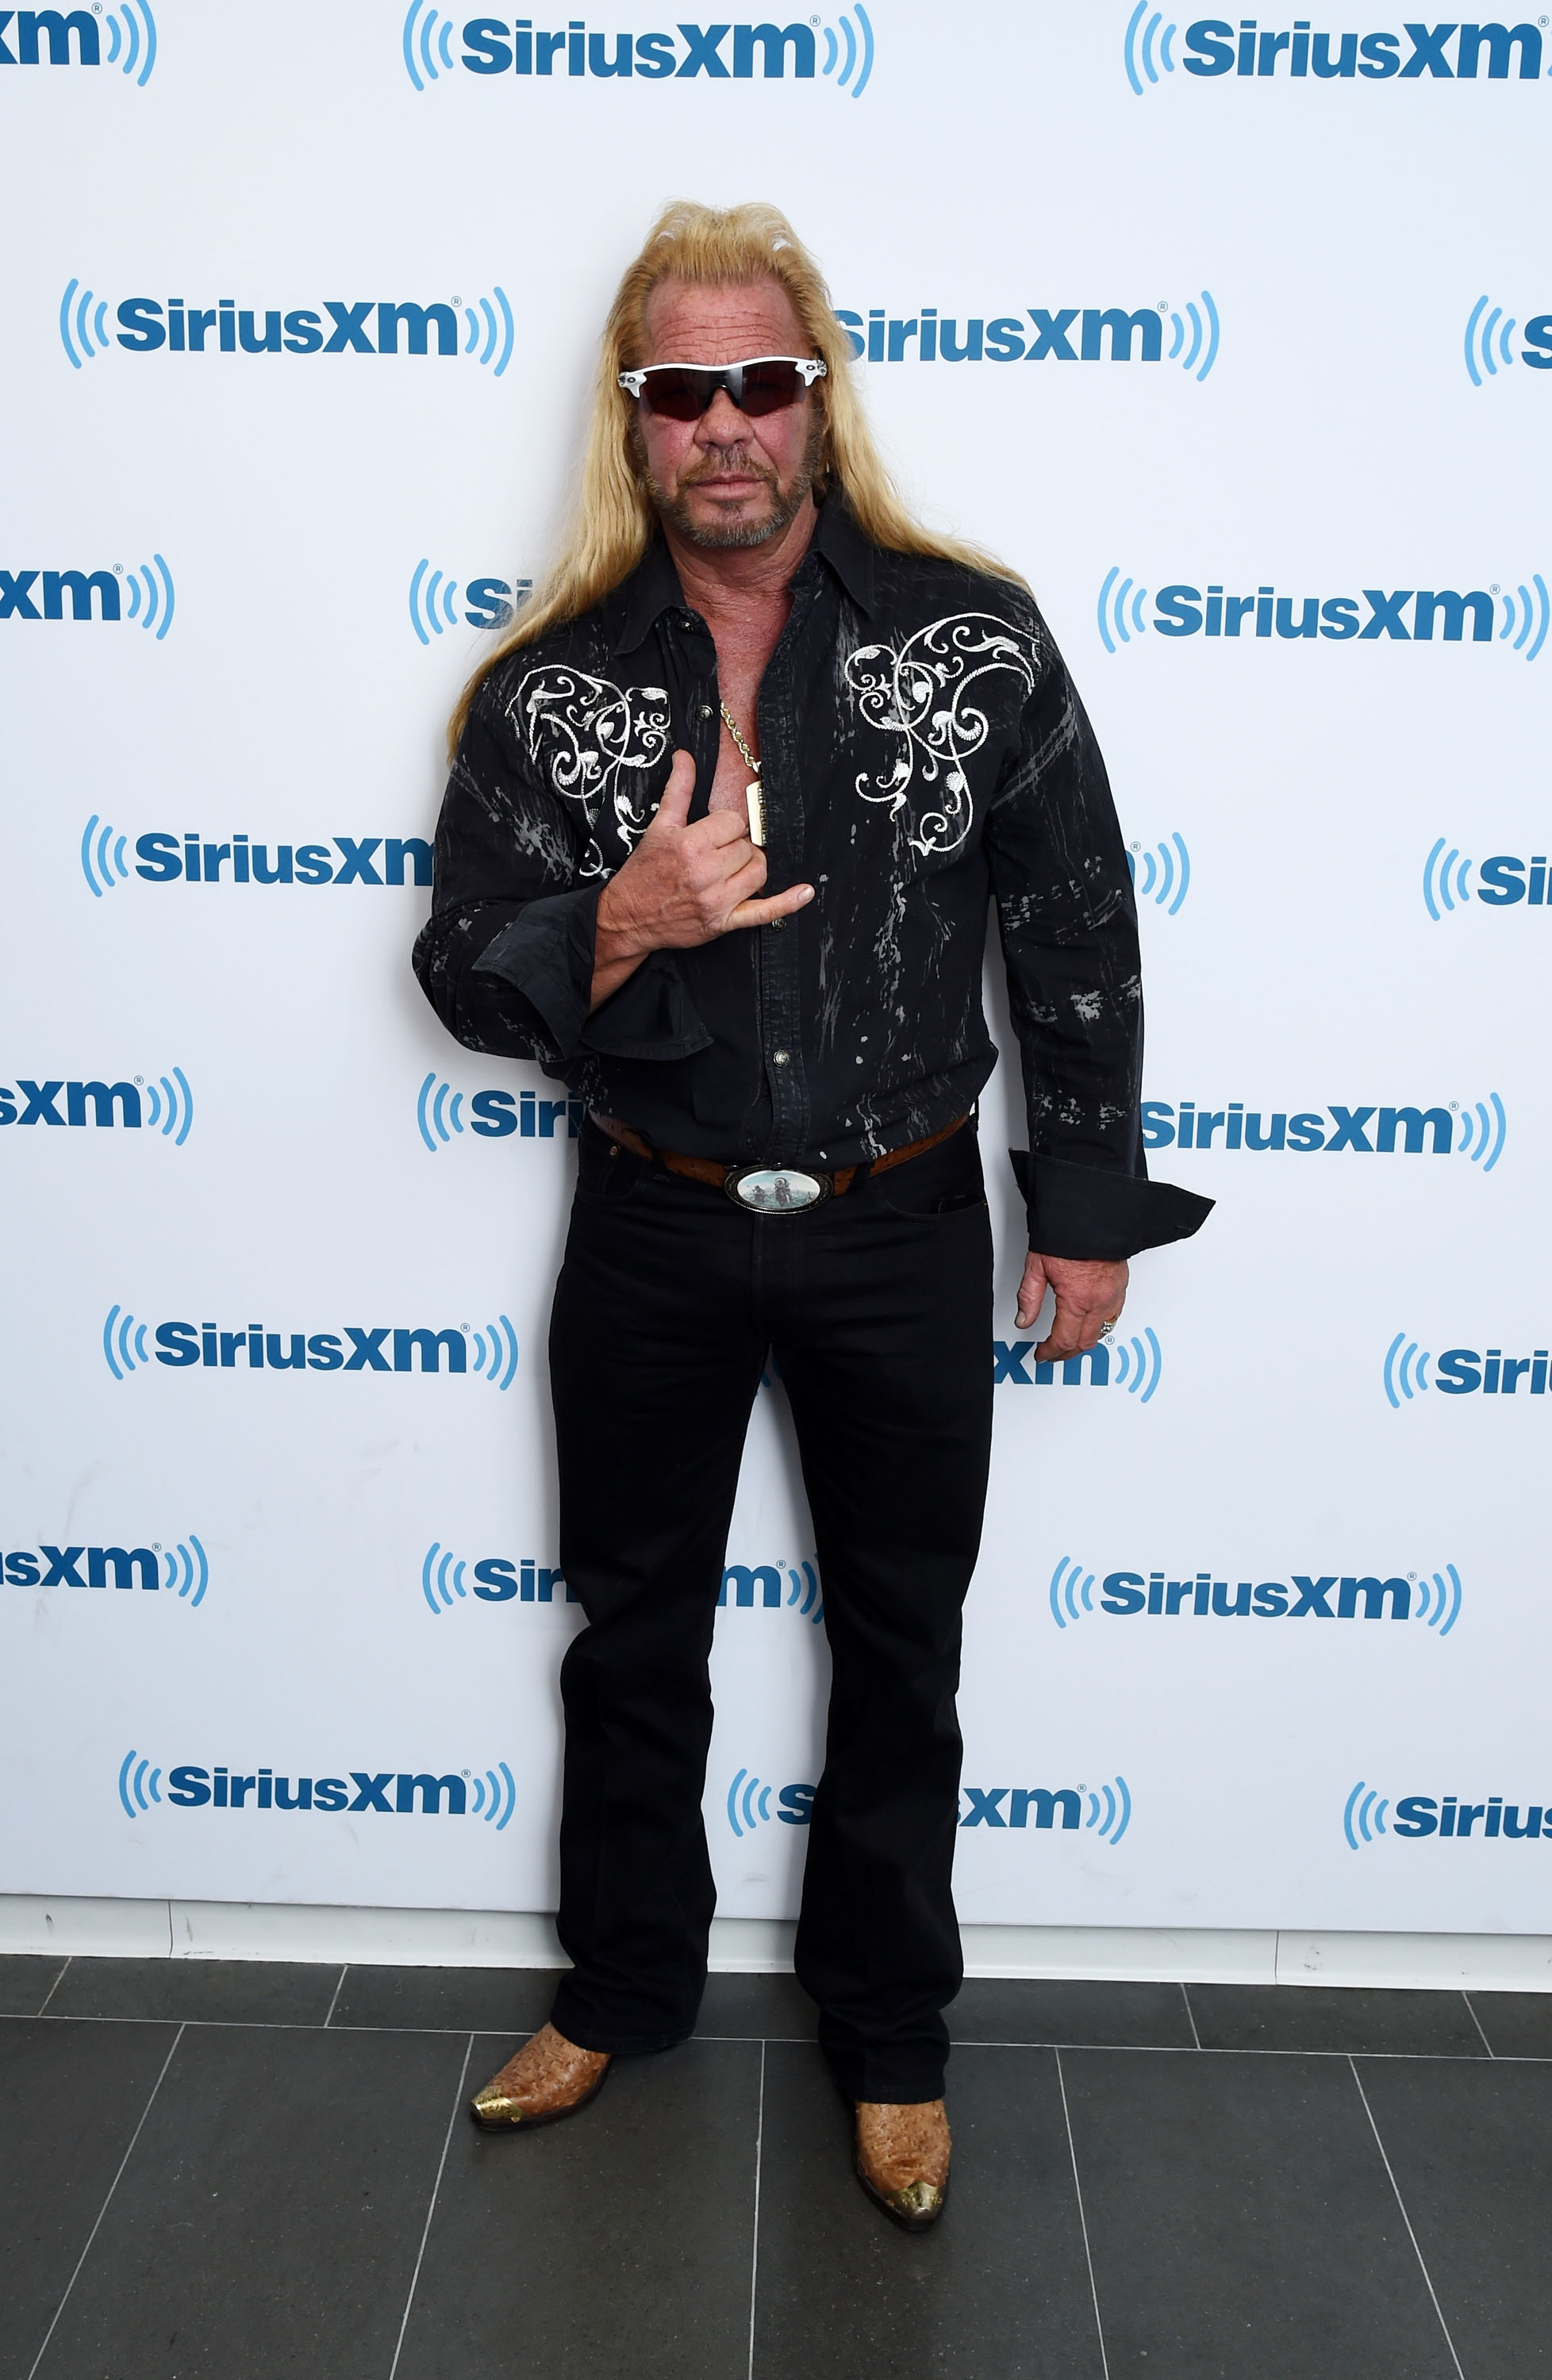 Duane Chapman visits the SiriusXM Studios on April 24, 2015, in New York City. | Source: Getty Images